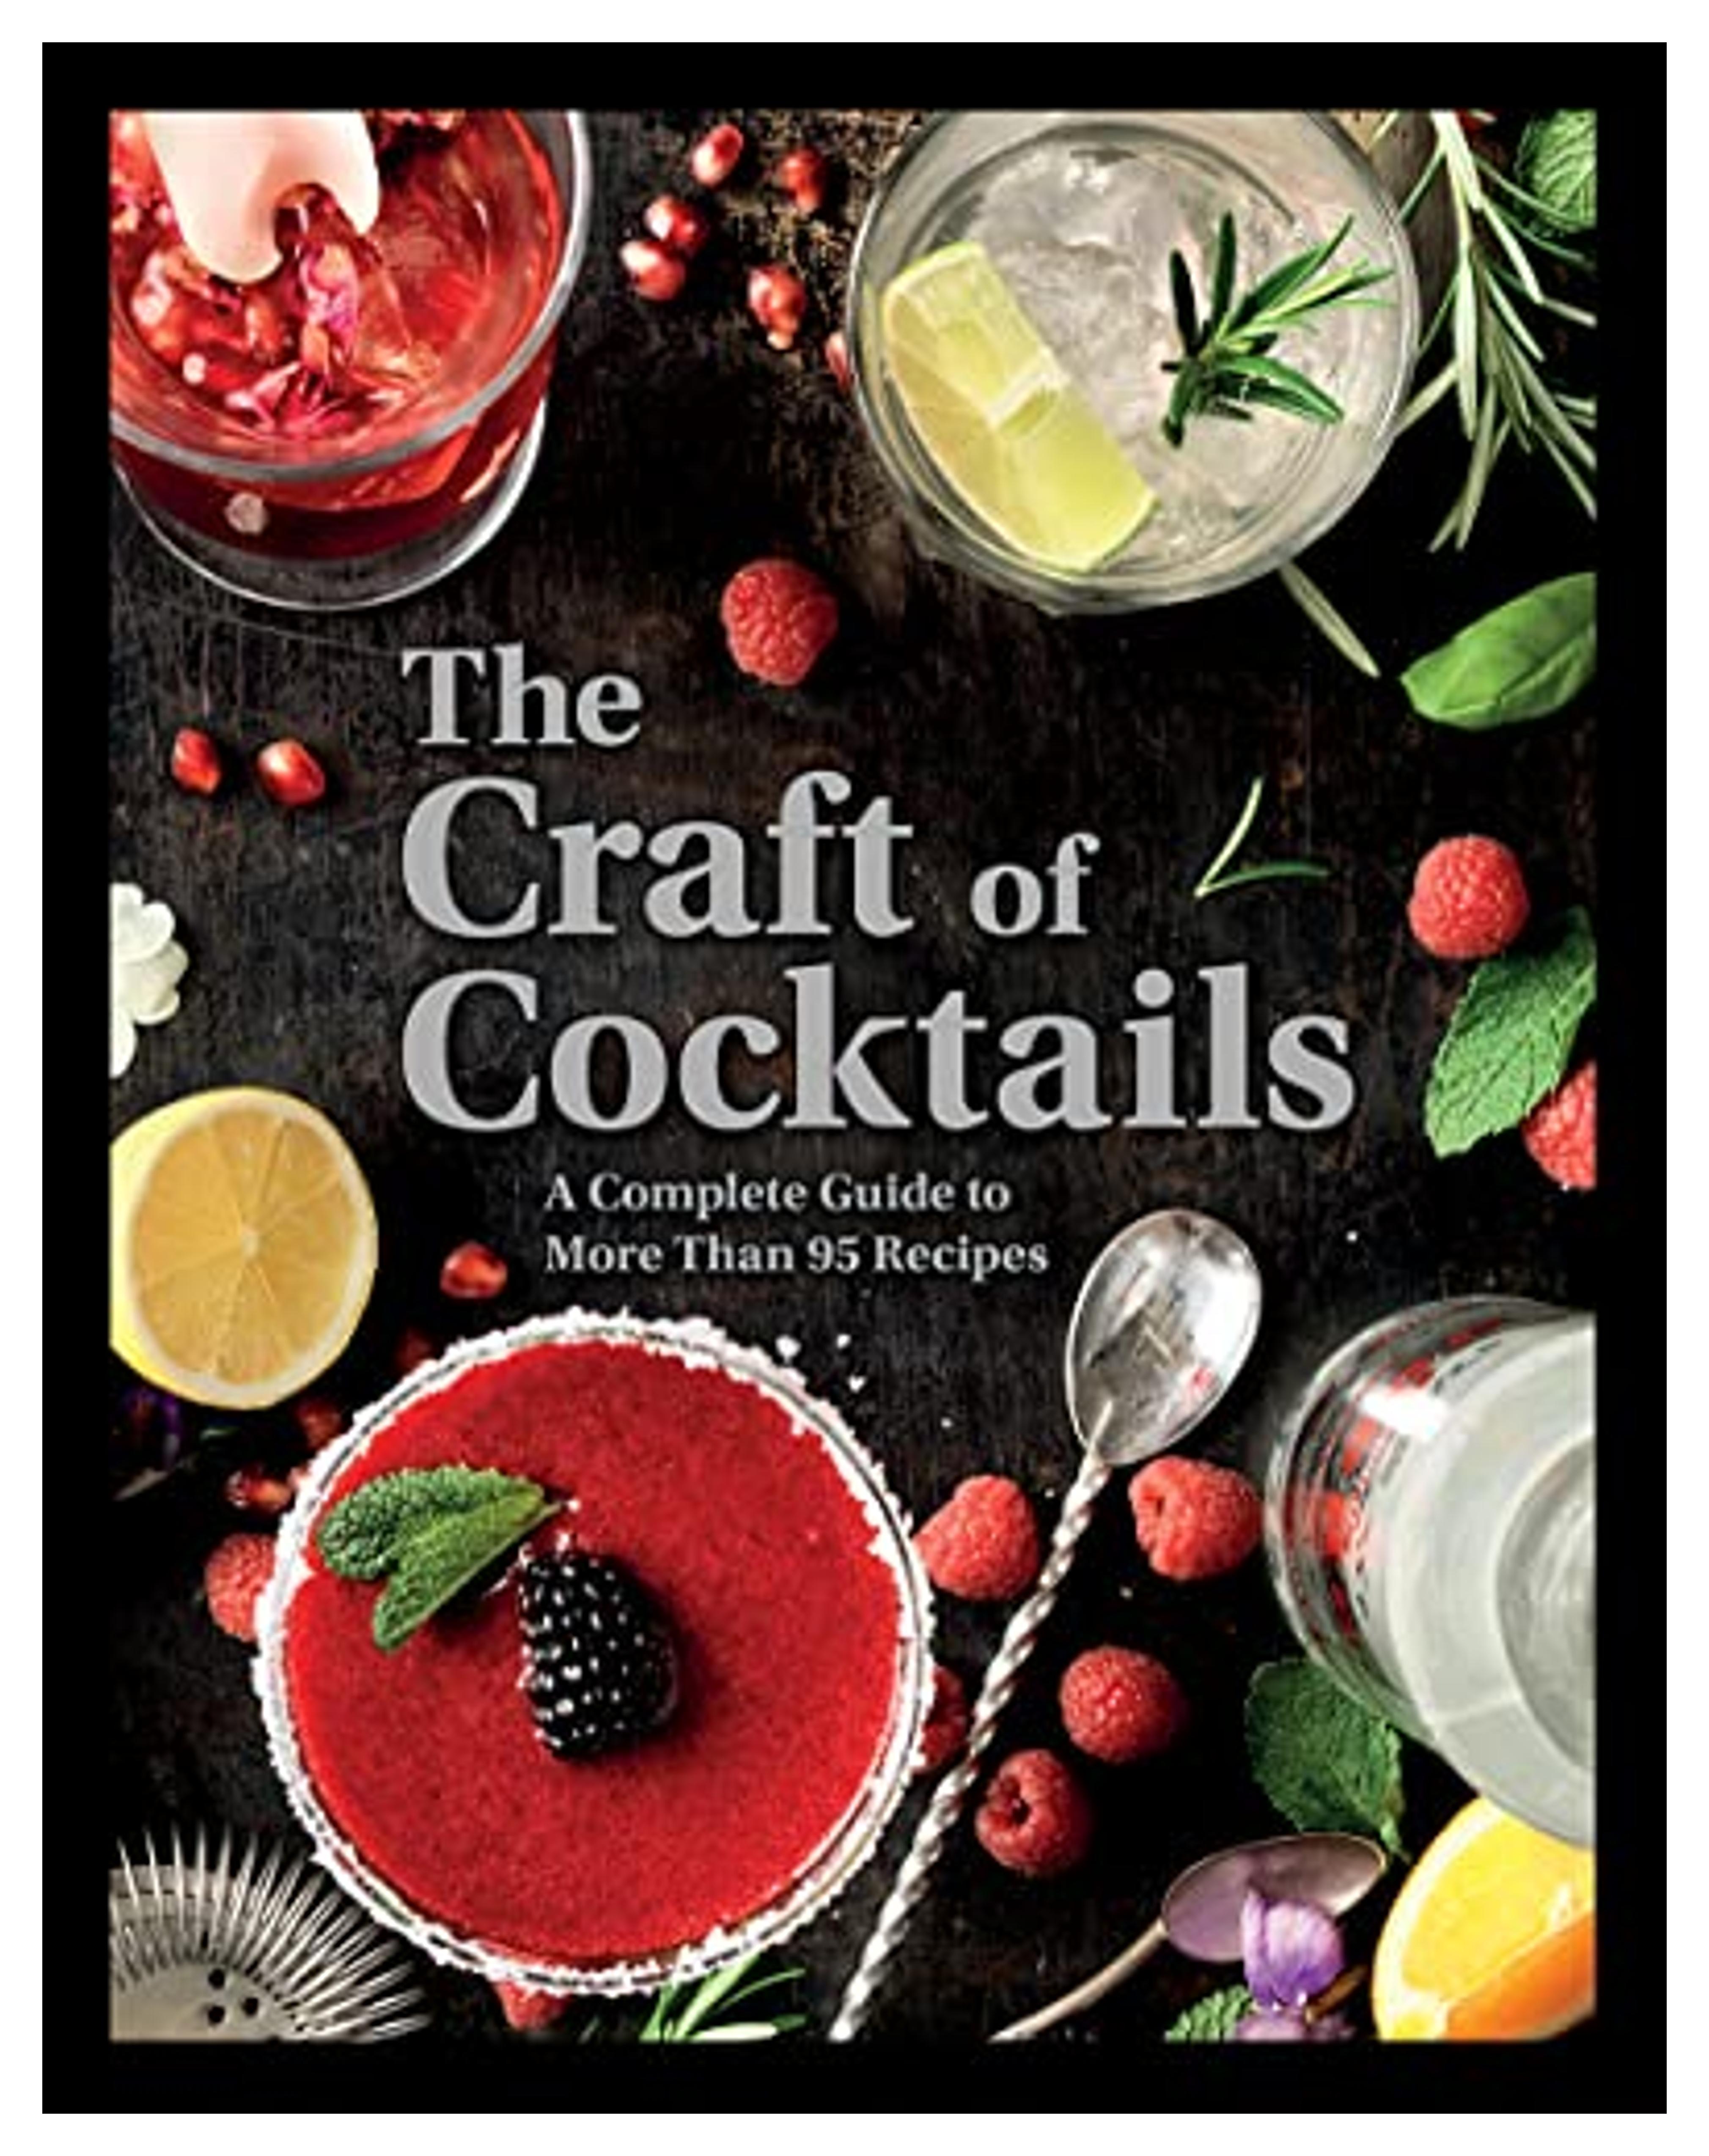 The Craft Of Cocktails: A Complete Mixology Guide To More Than 95 Artisan Drink Recipes: Cottage Door Press, Parragon Books, Parragon Books: 9781680528695: Amazon.com: Books